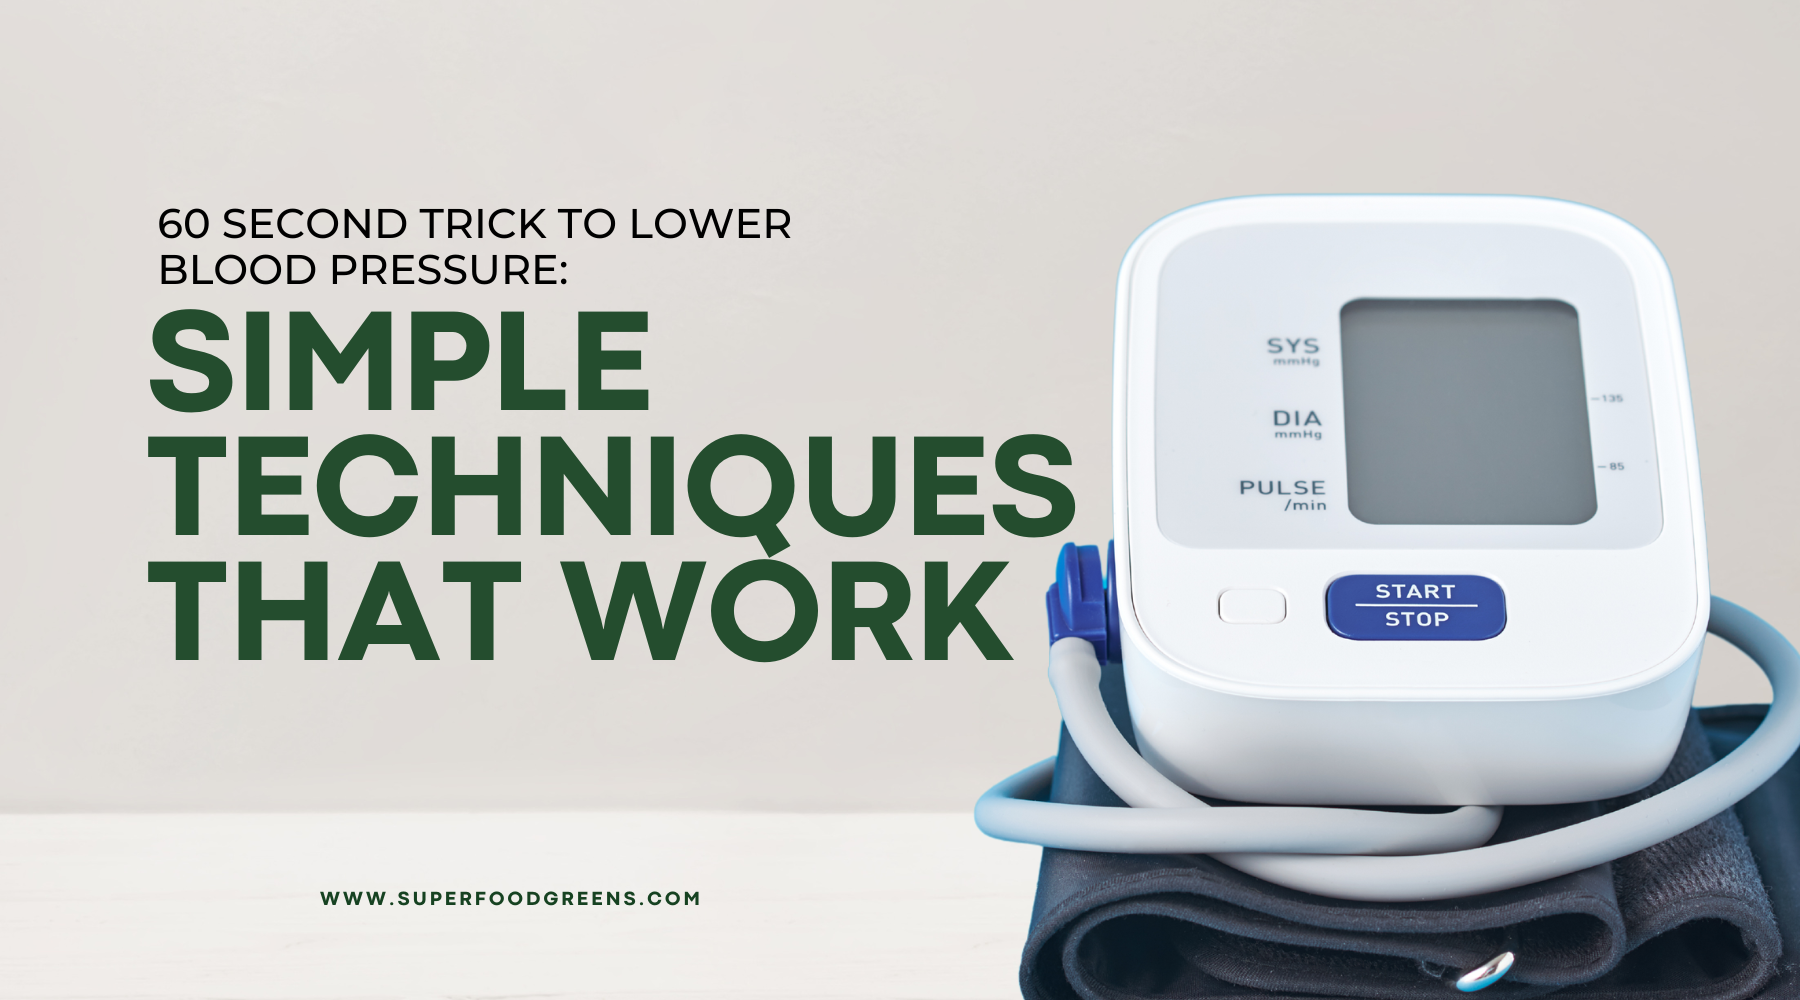 60 Second Trick to Lower Blood Pressure: Simple Techniques That Work | 60 second trick to lower blood pressure